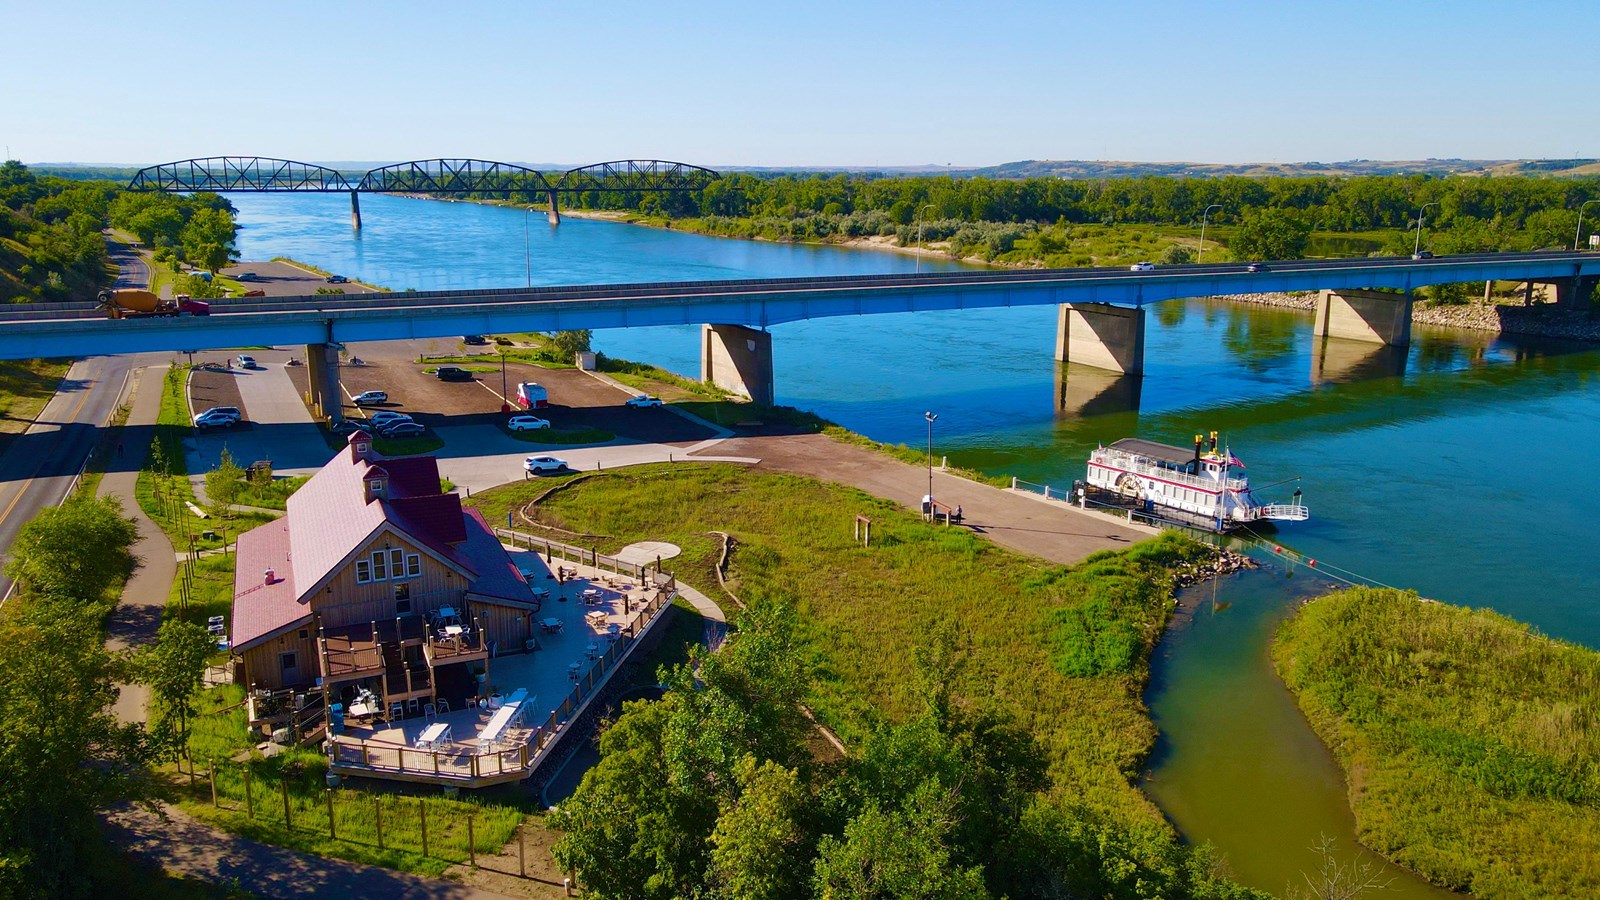 Visitor Center on the banks of the Missouri River with historic bridge  